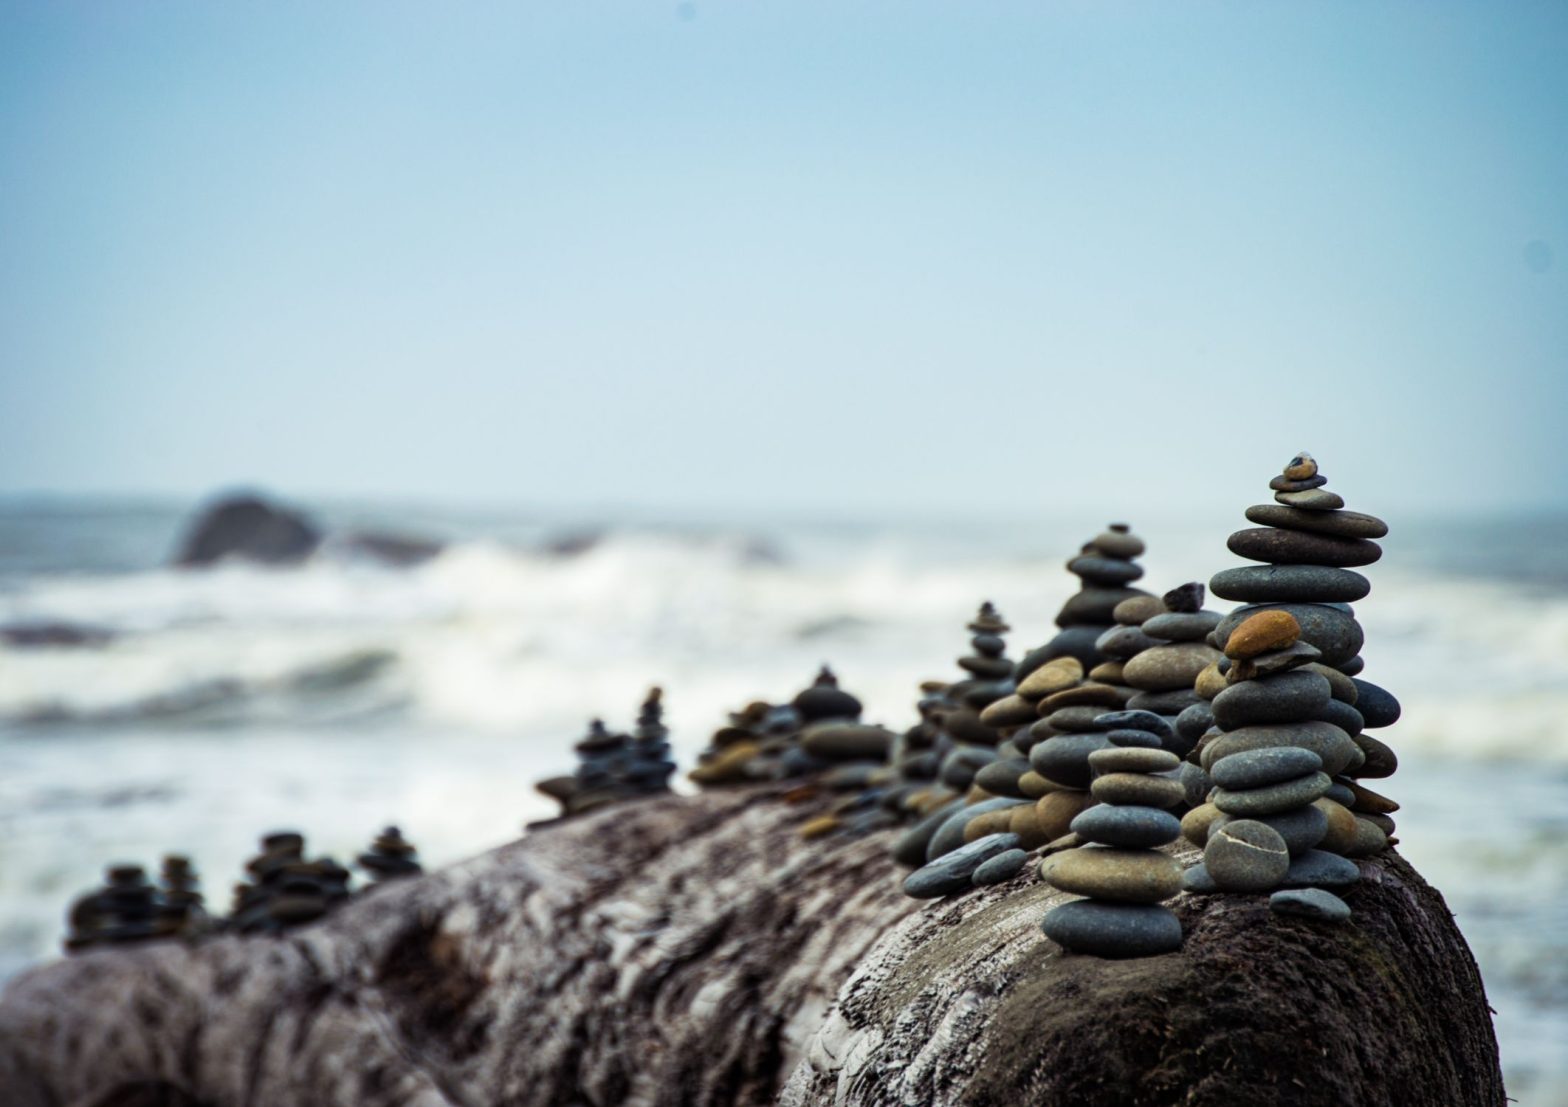 Image shows a series of carefully stacked pebble piles on a cliff beside the sea